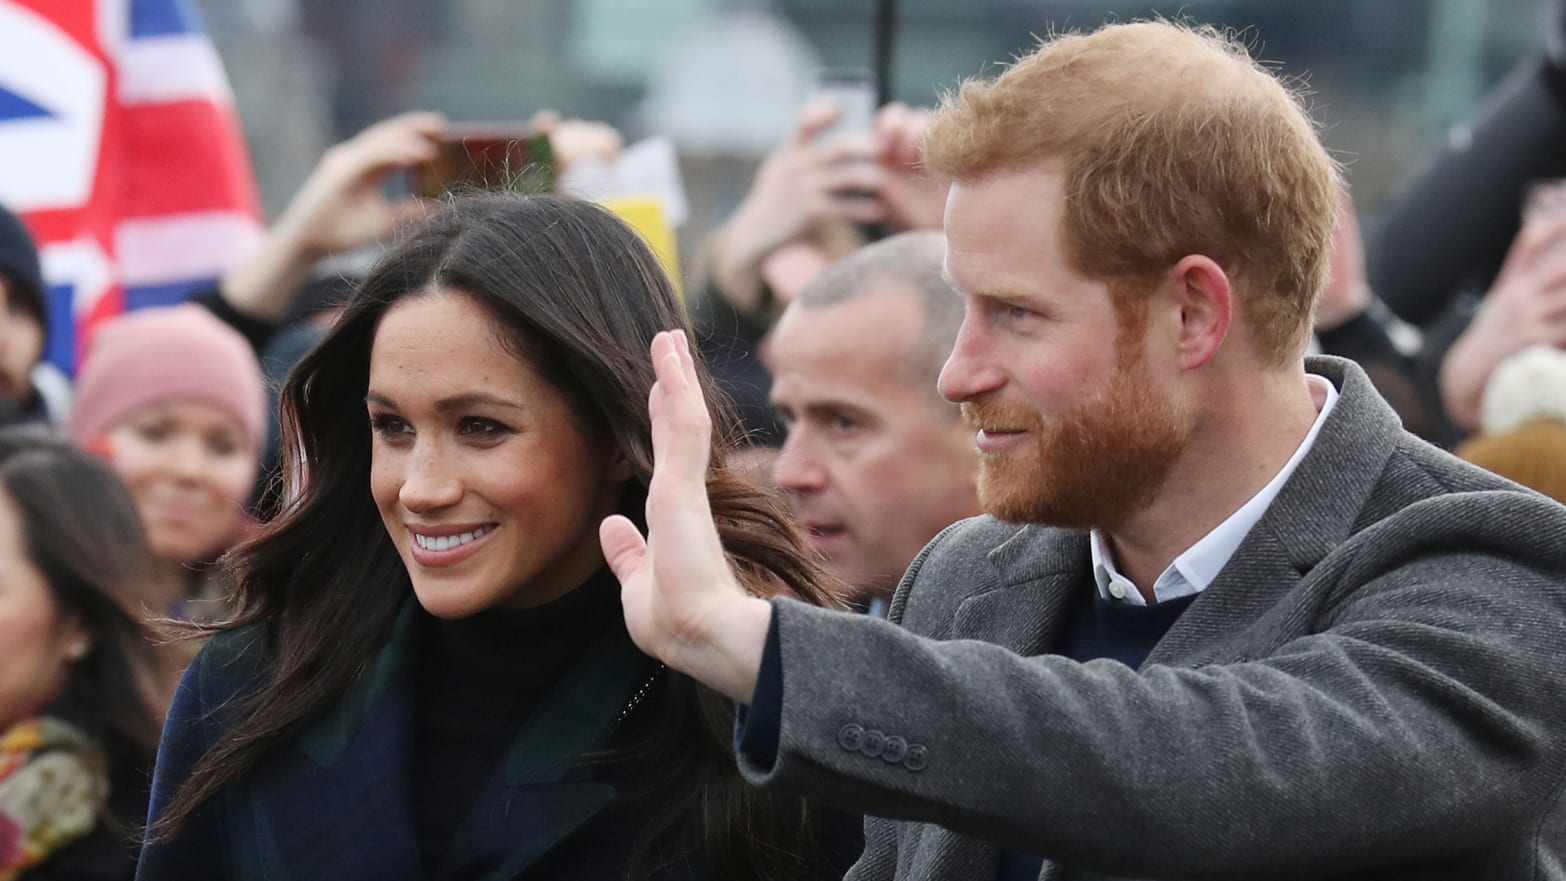 Prince Harry and Meghan Markle’s Netflix docuseries “Harry & Meghan” has been nominated for a Hollywood Critics Association award.